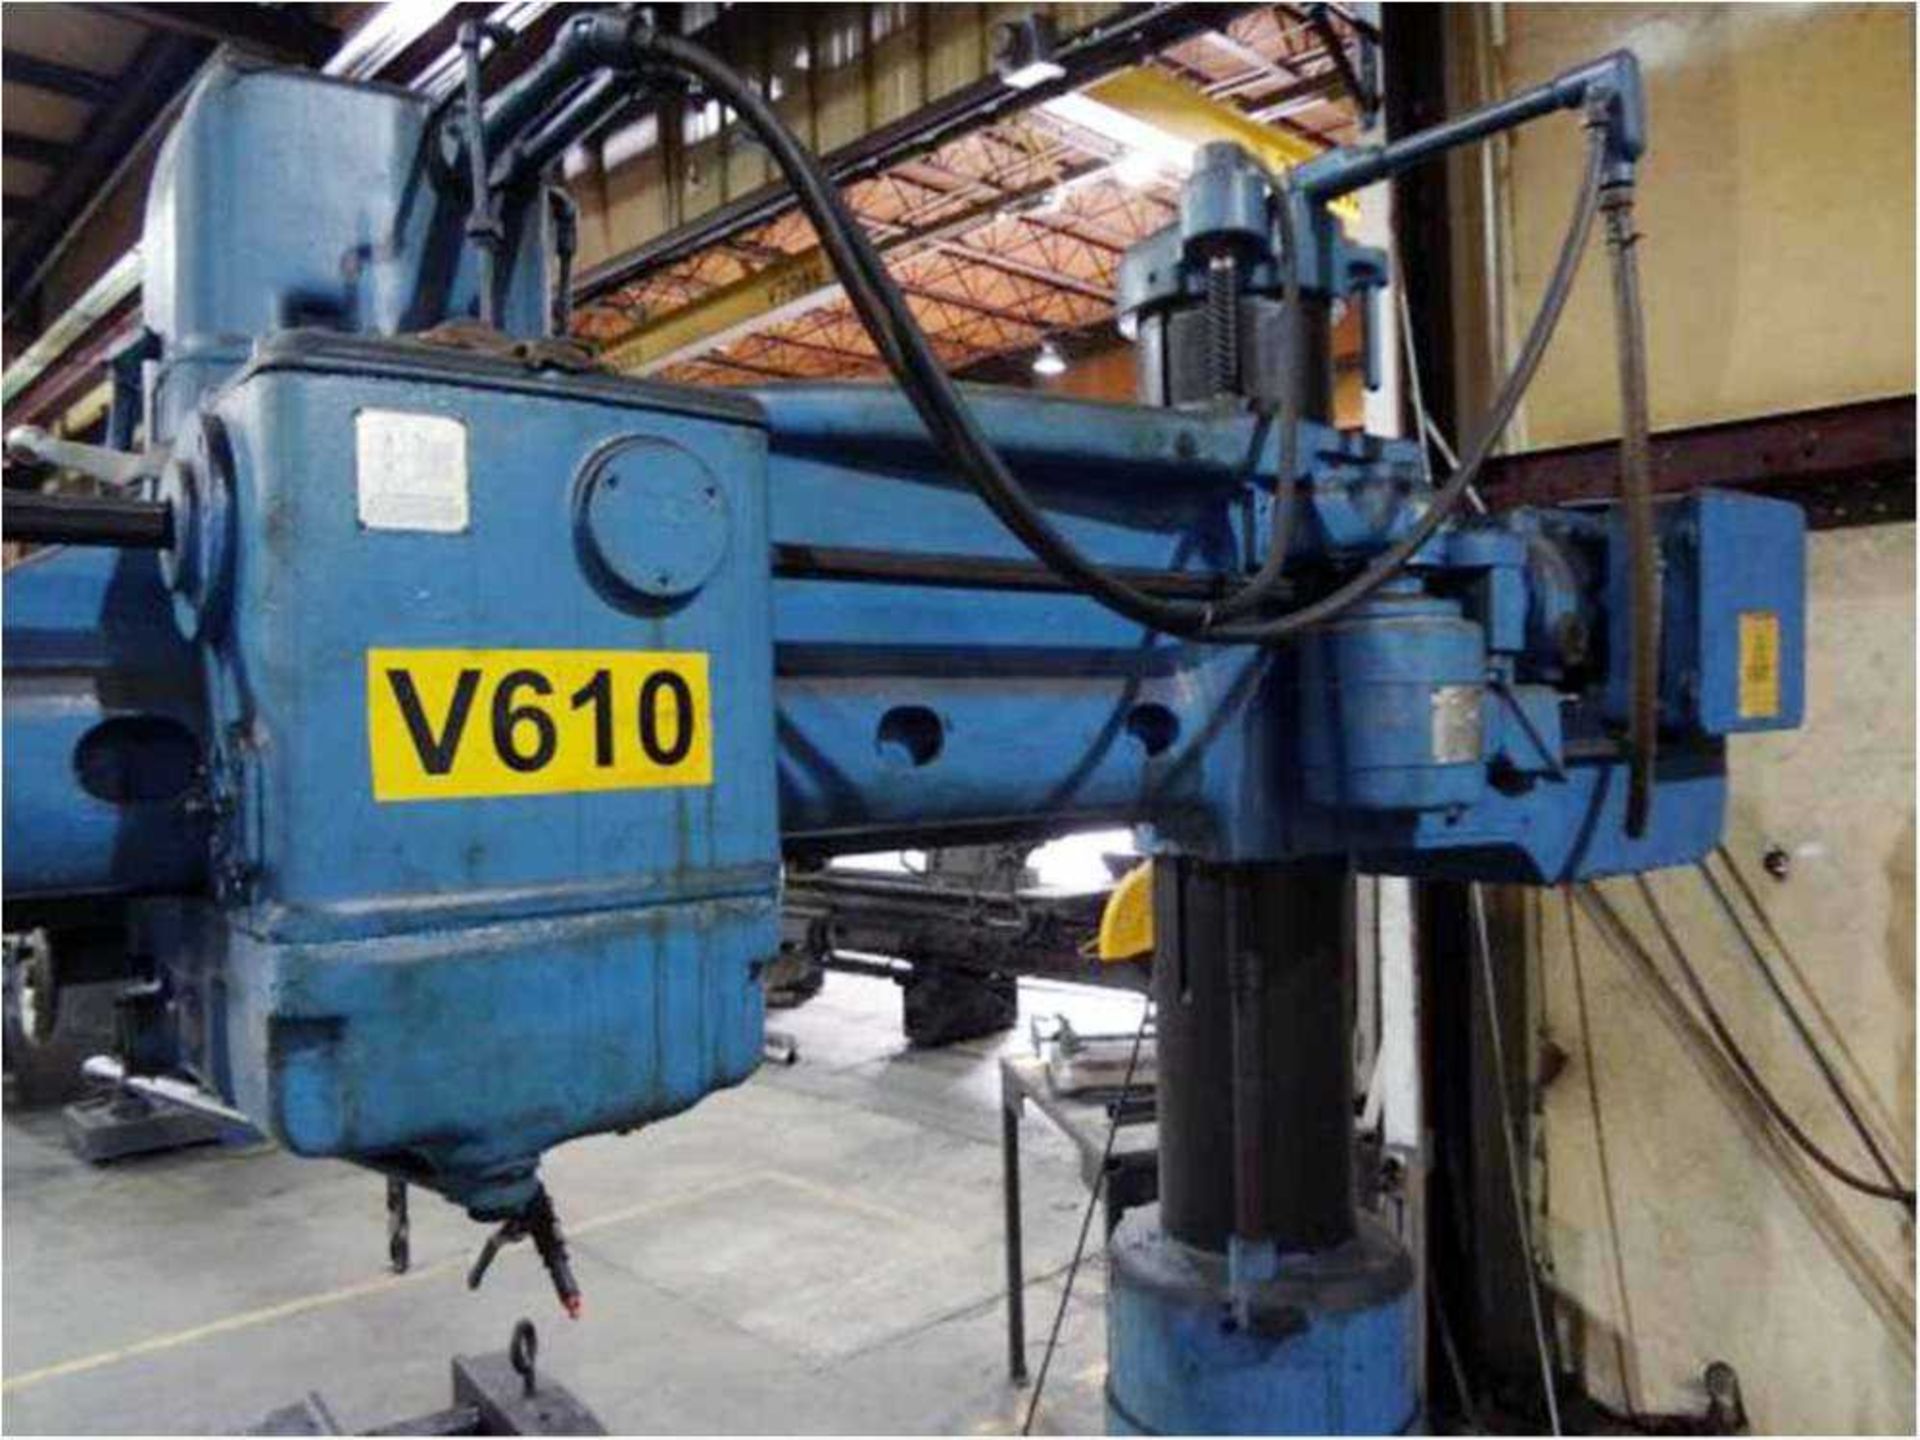 Carlton Radial Arm Drill, 4' x 11", Mdl: 1A, S/N: 1A-3845 (6663P) (Located In Painesville, OH) - Image 3 of 5